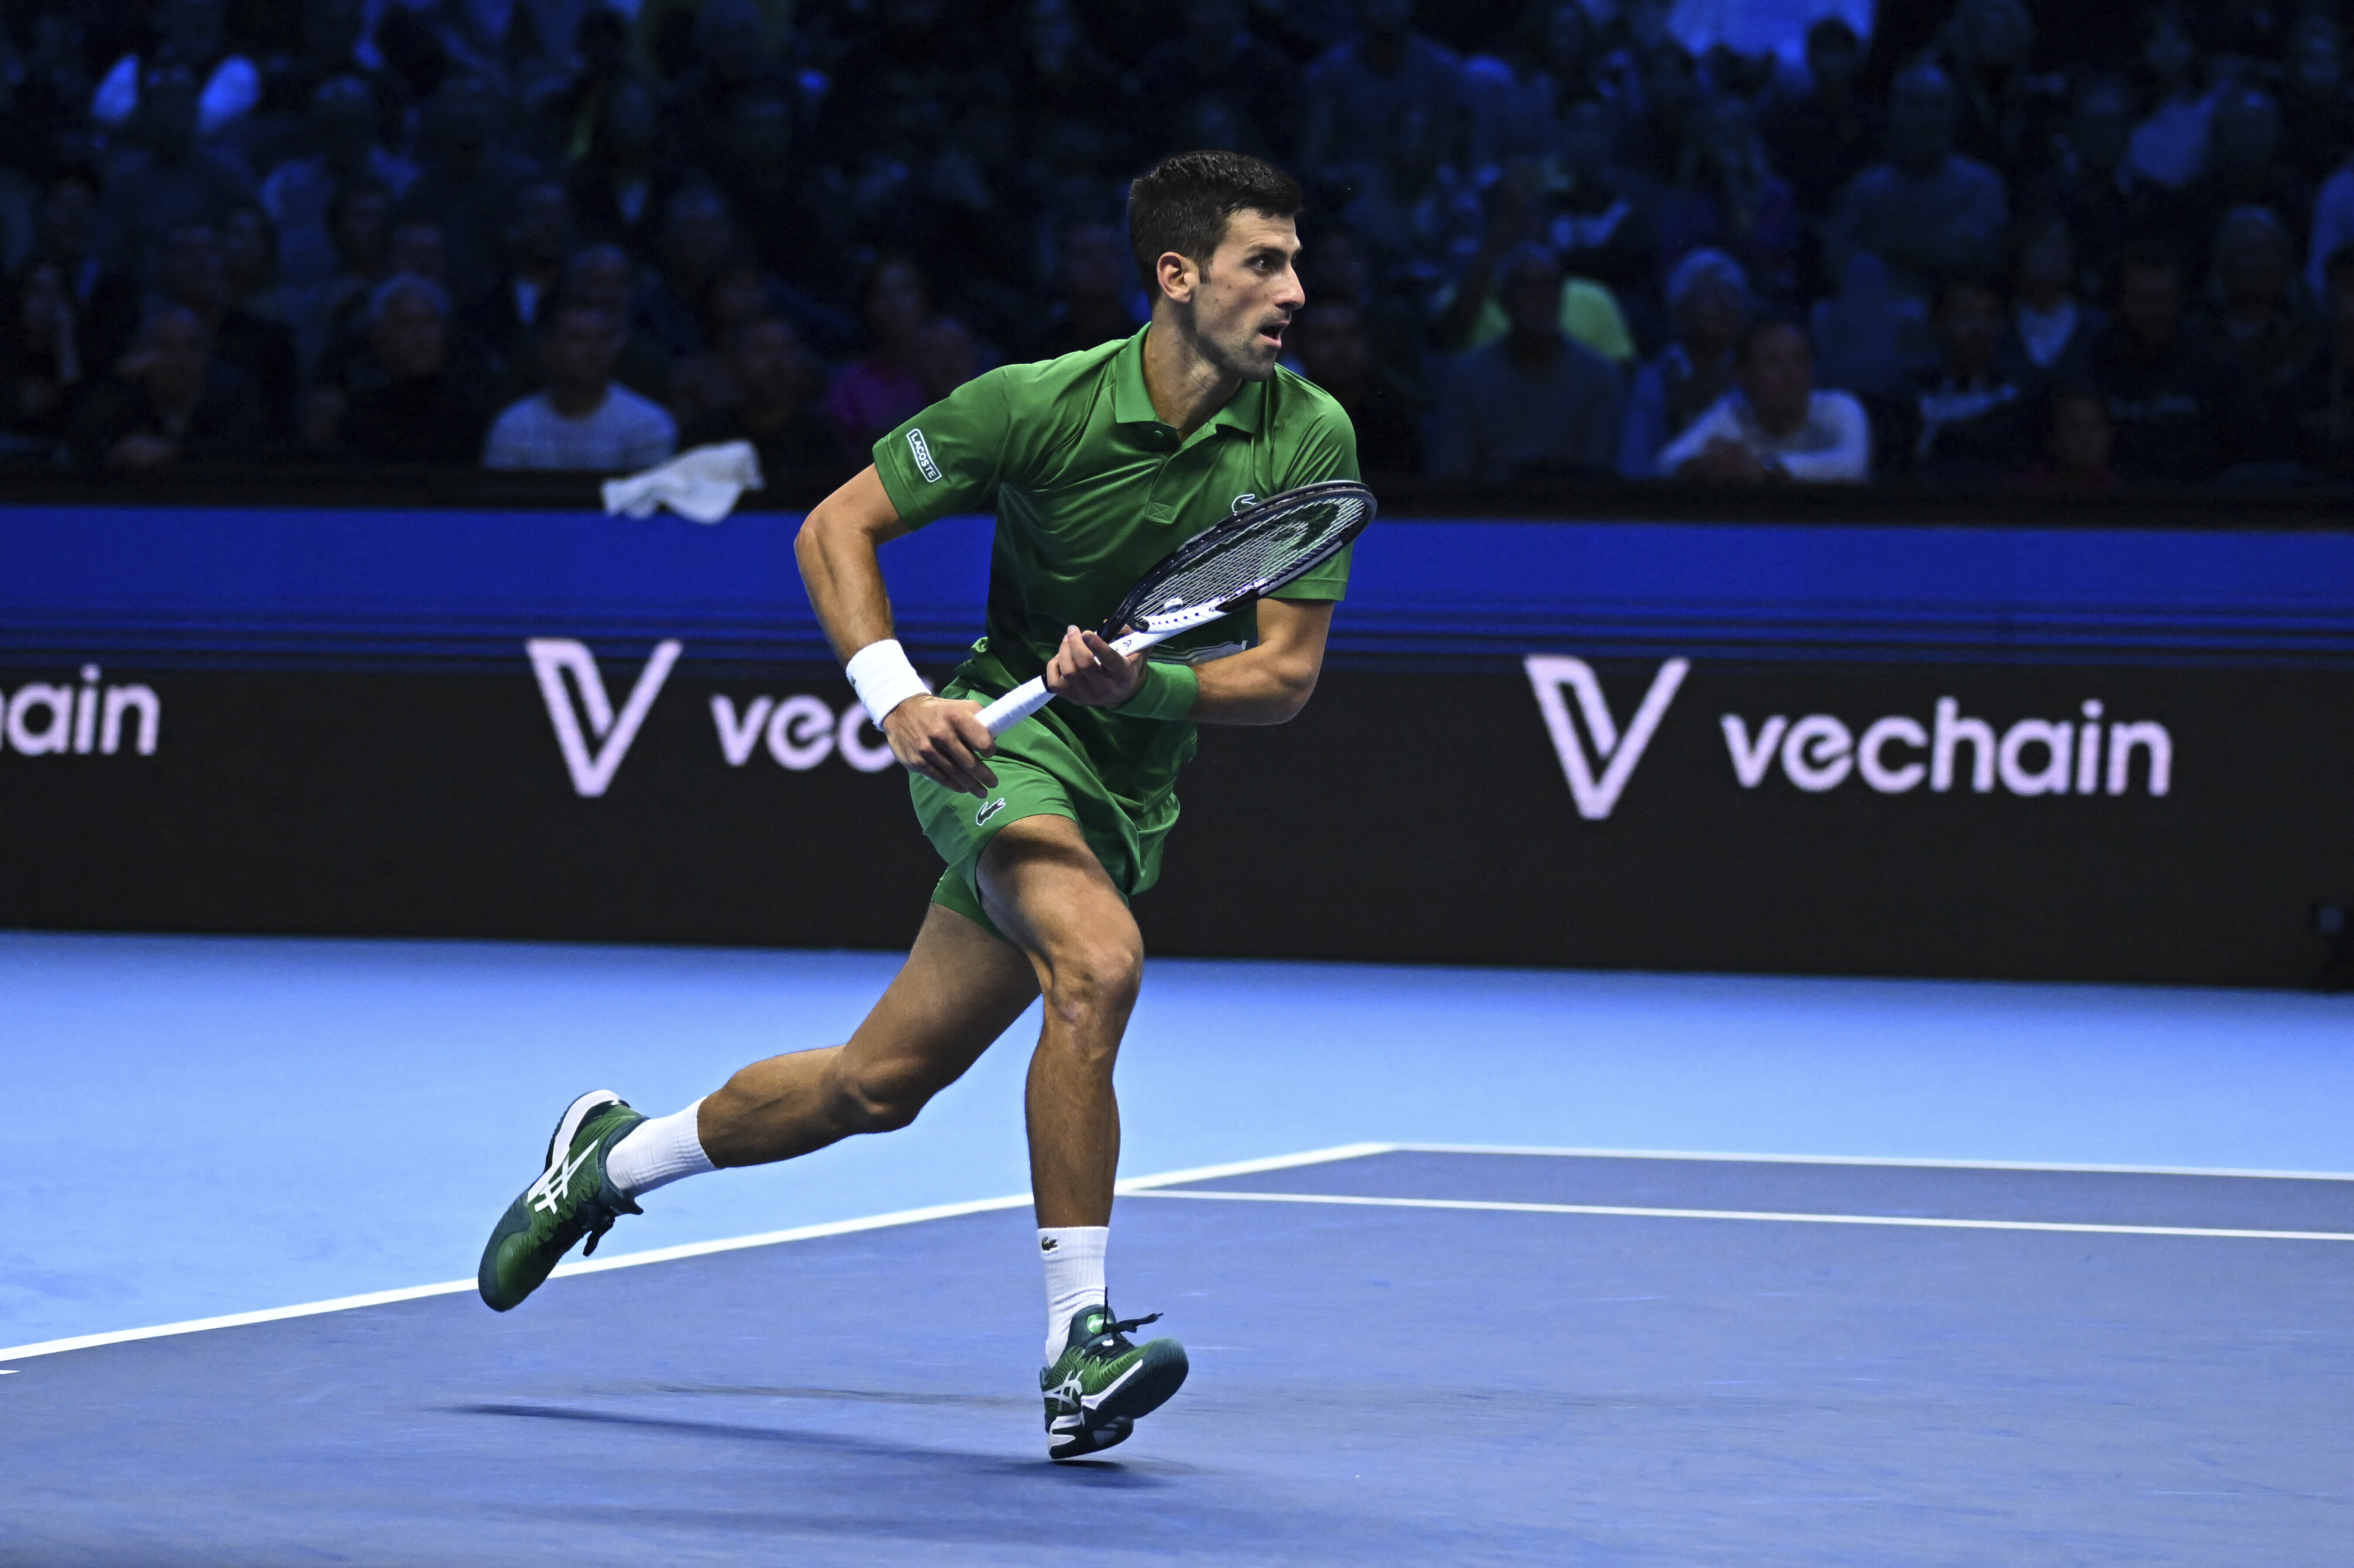 Novak Djokovic received good news from Australia, and he played like it in